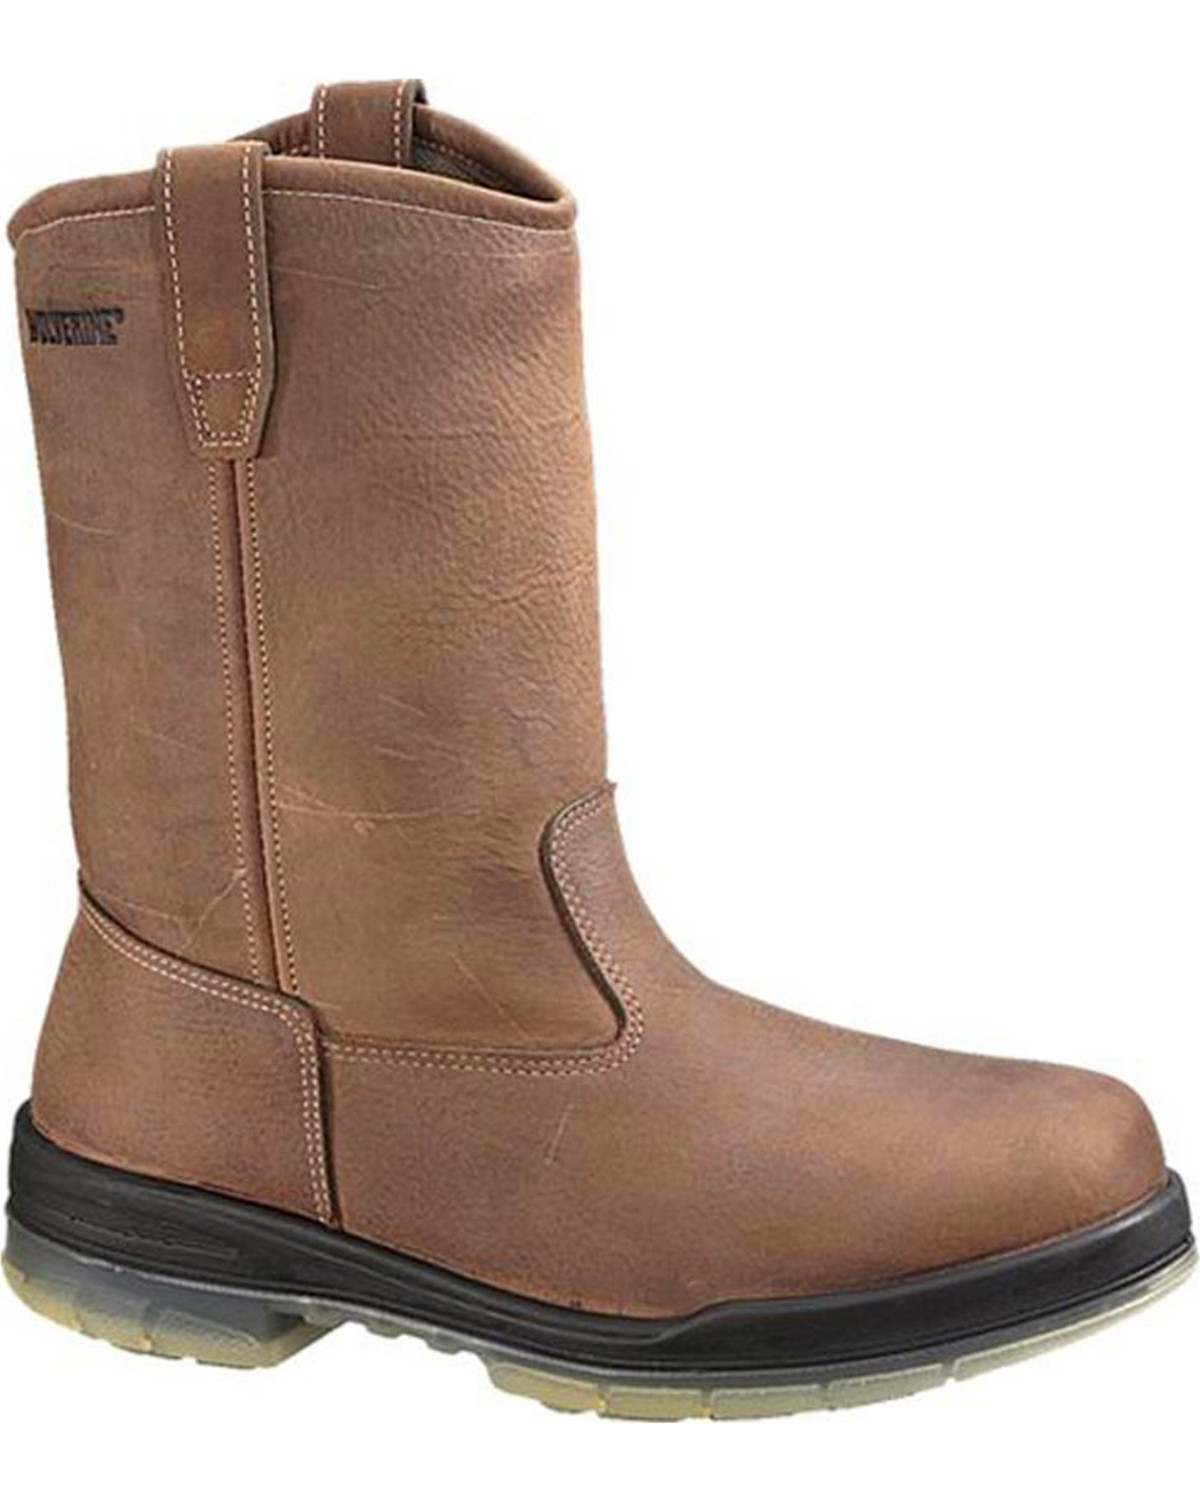 insulated safety wellington boots